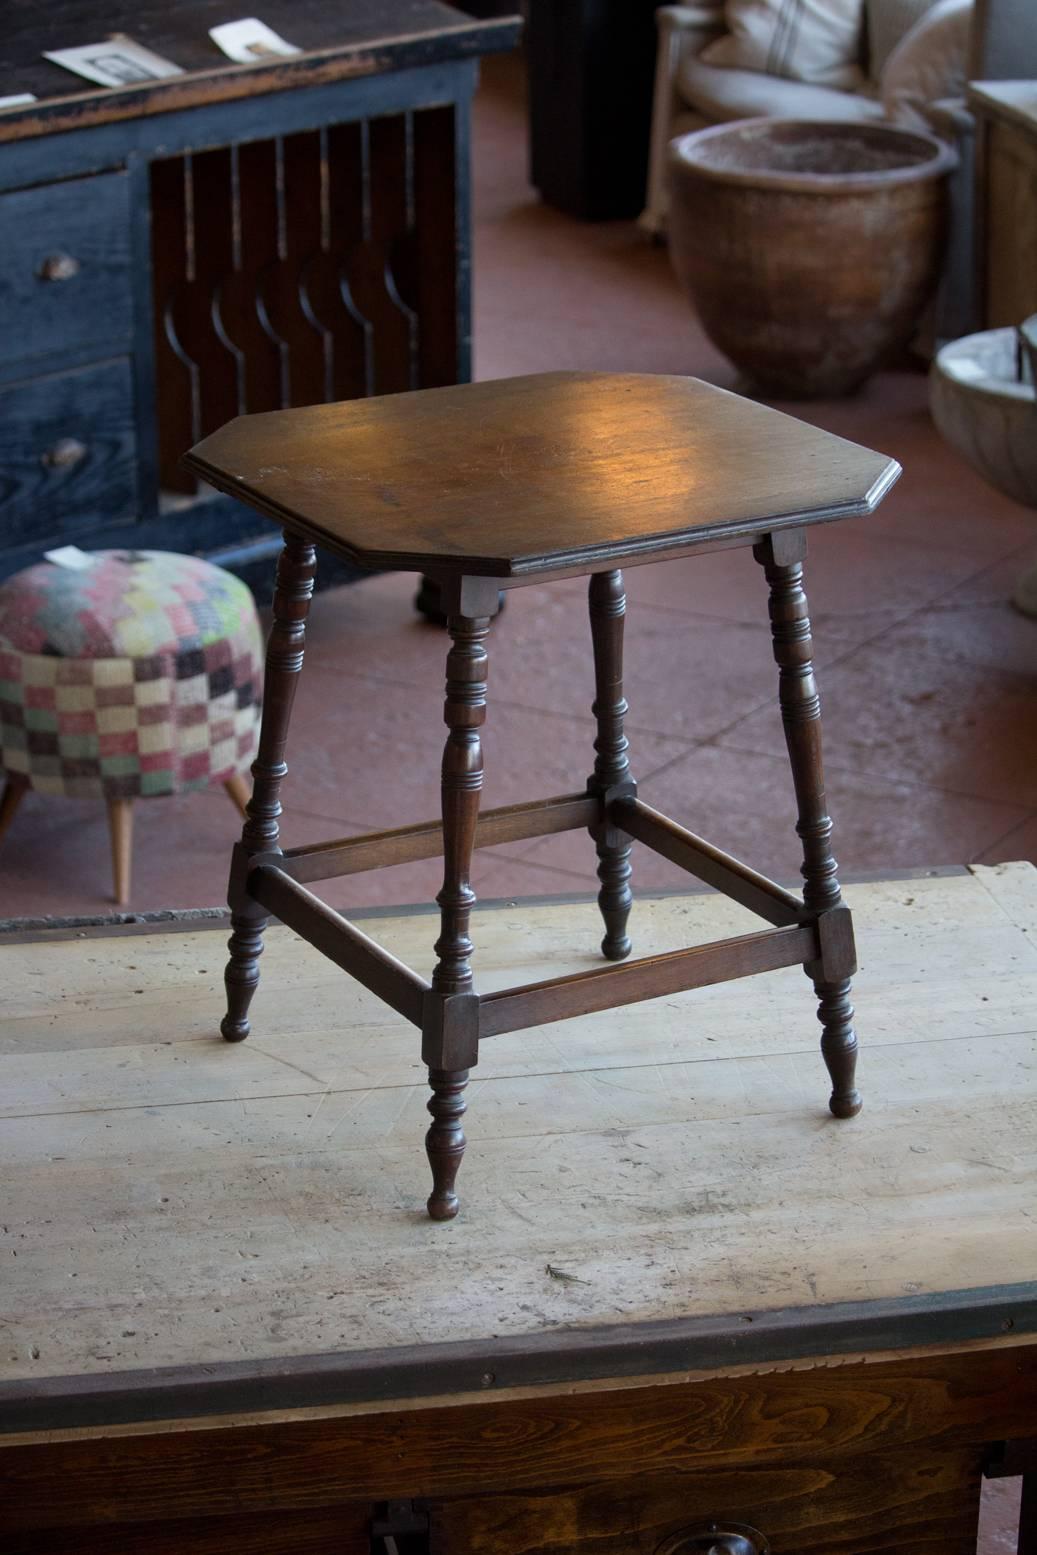 Early 20th century lamp table with hexagonal top and turned legs.